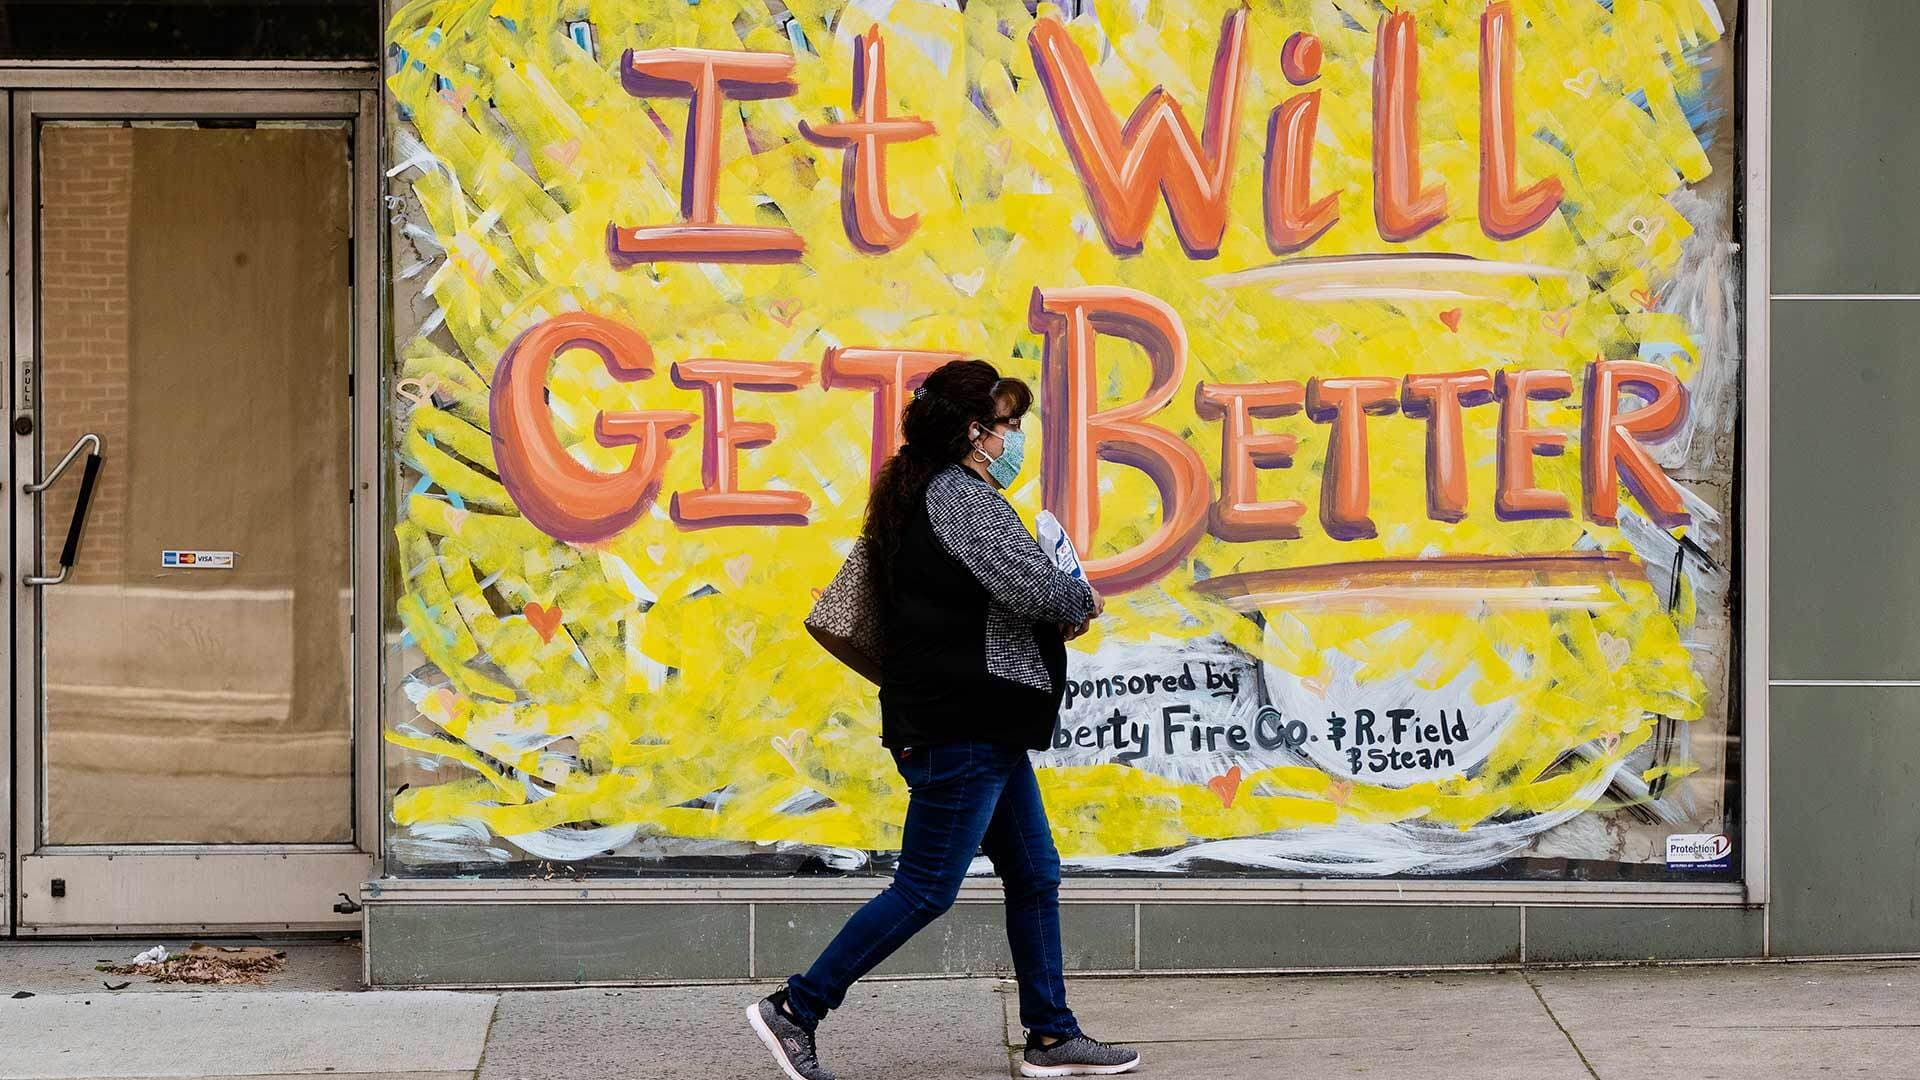 Person wearing mask walks by a sign that says "It will get better."